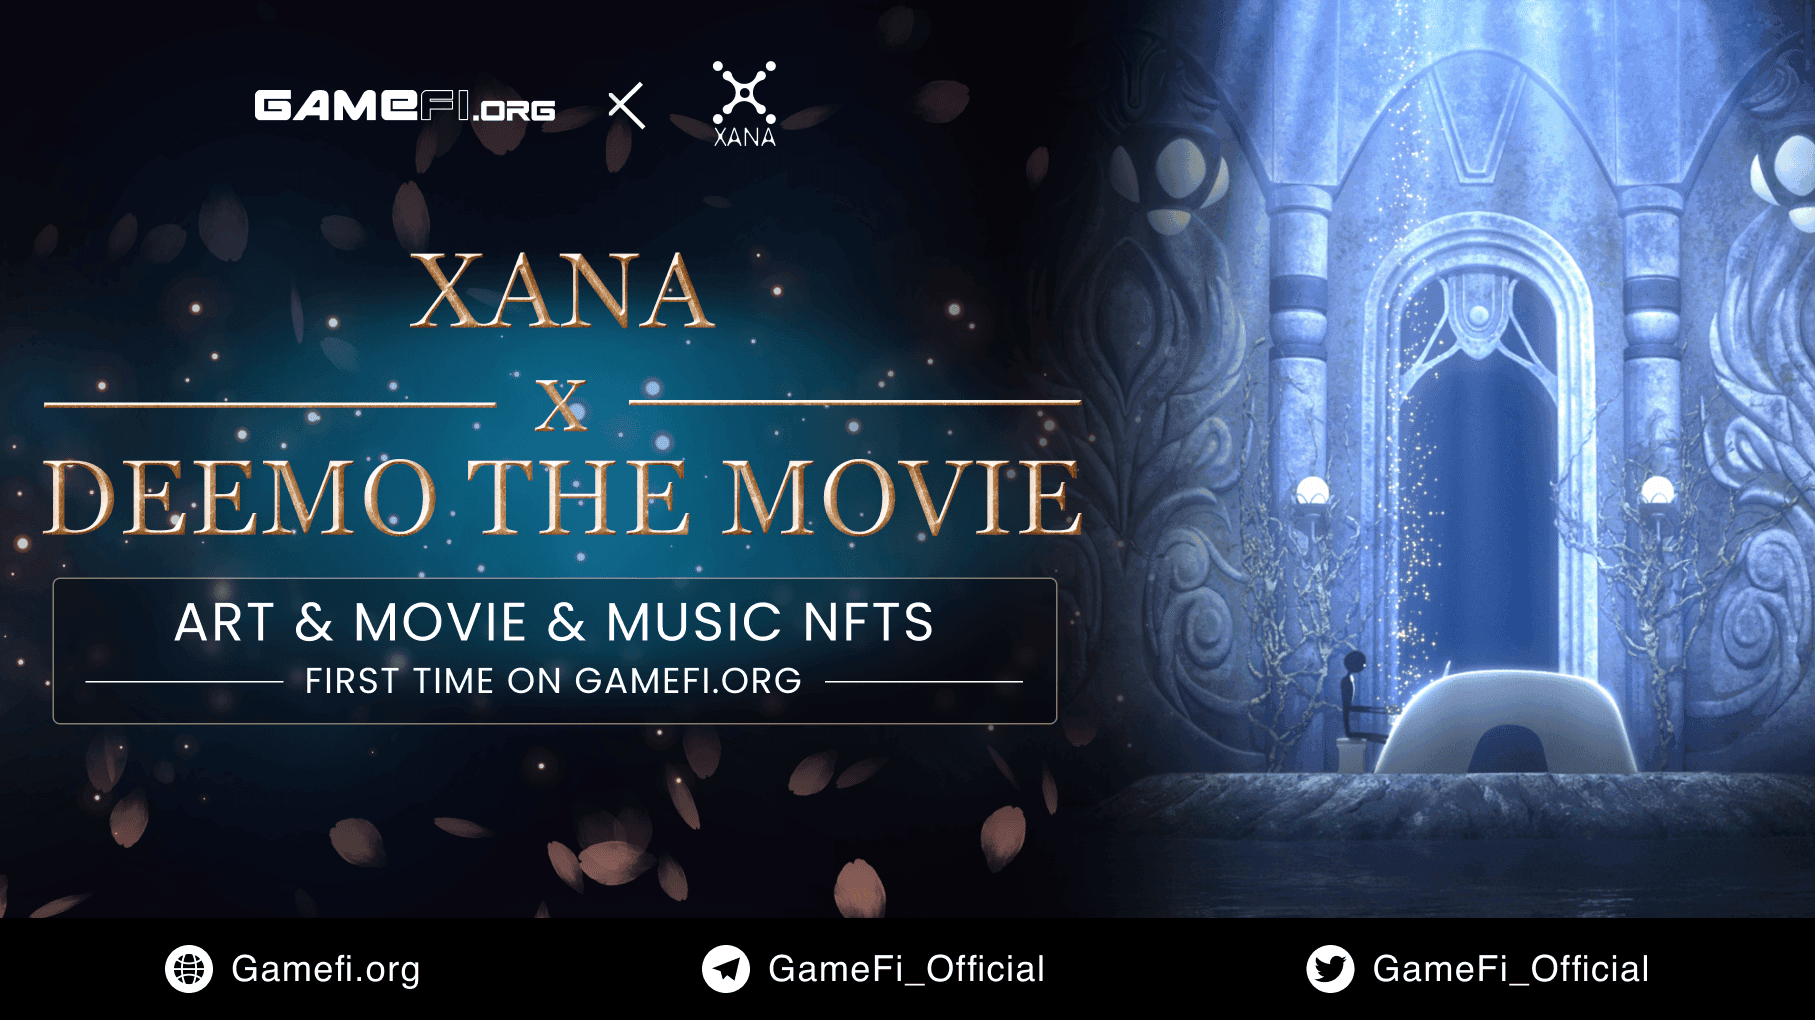 XANA X DEEMO THE MOVIE: GameFi.org Welcomes Digital Collectibles of Music, Movie & Art